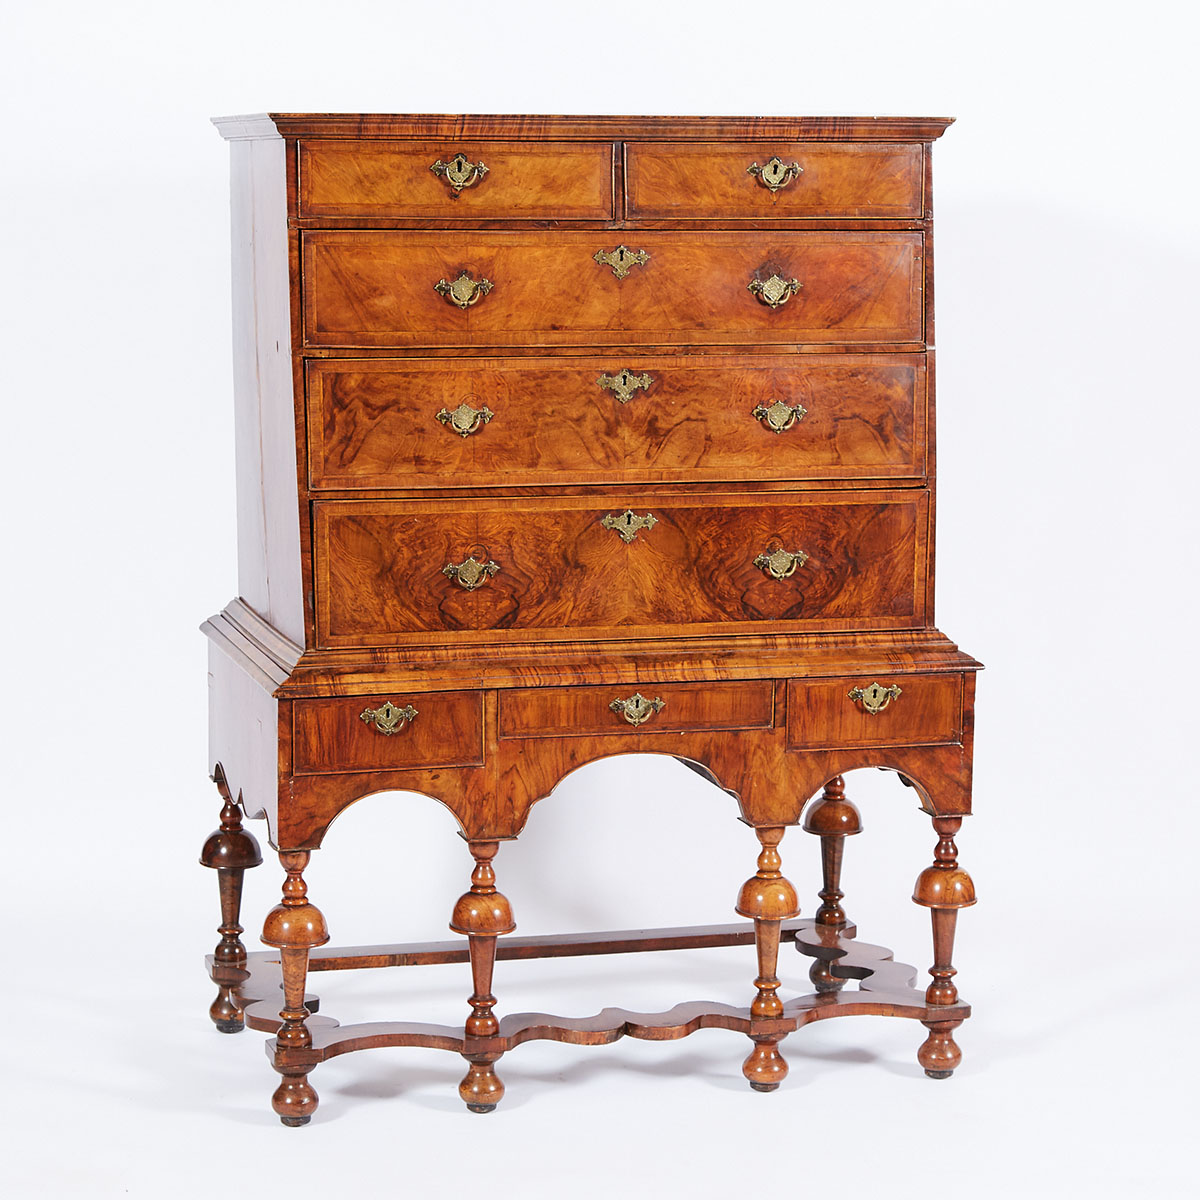 William and Mary Figured Walnut Chest on Stand, late 17th century